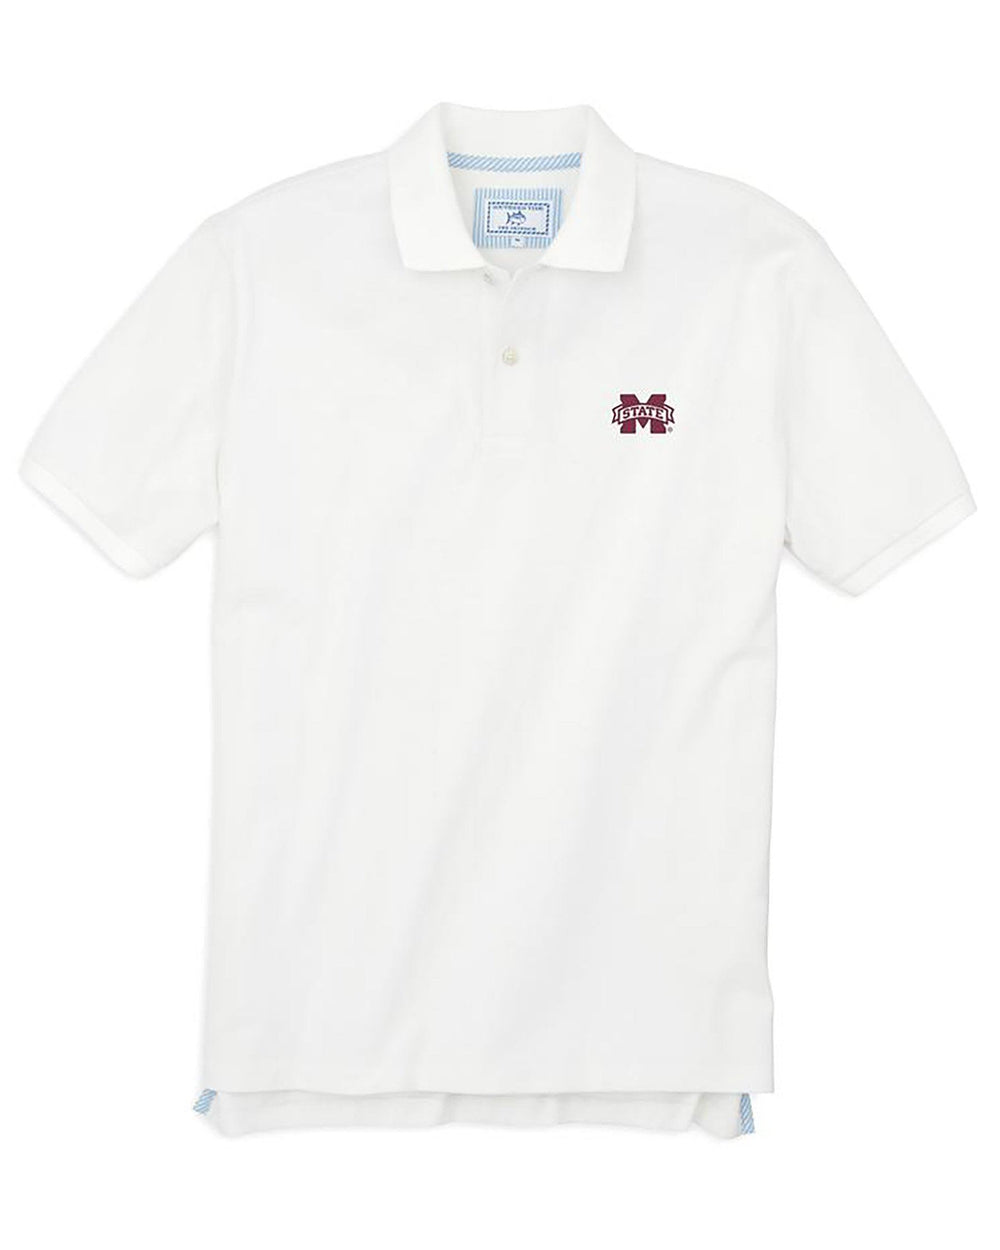 The front view of the Men's White Mississippi State Pique Polo Shirt by Southern Tide - Classic White